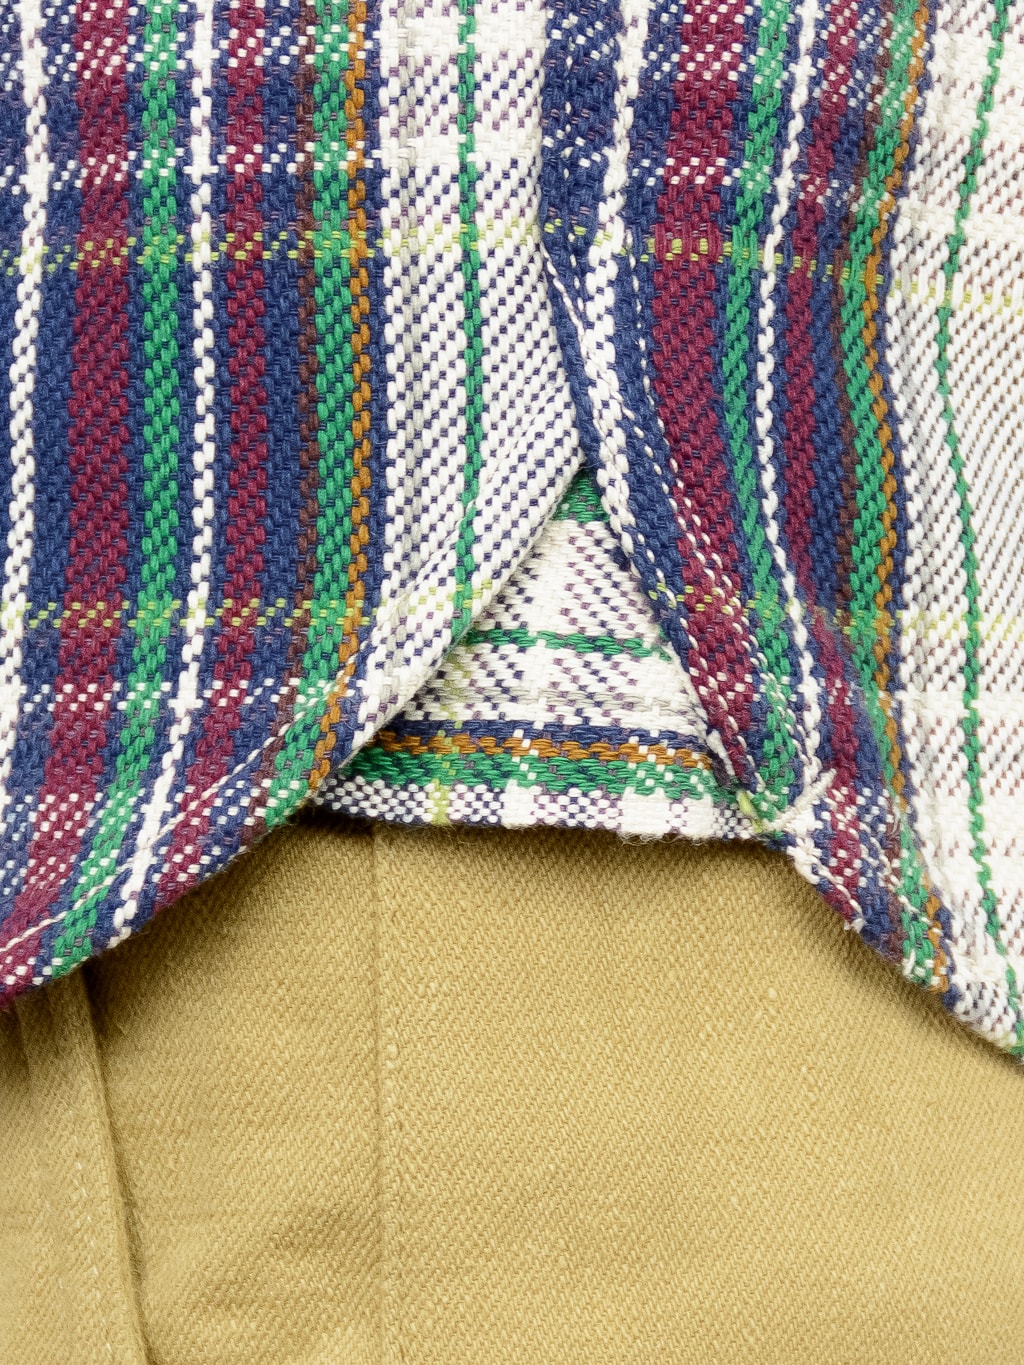 UES Heavy Flannel Shirt navy green selvedge detail